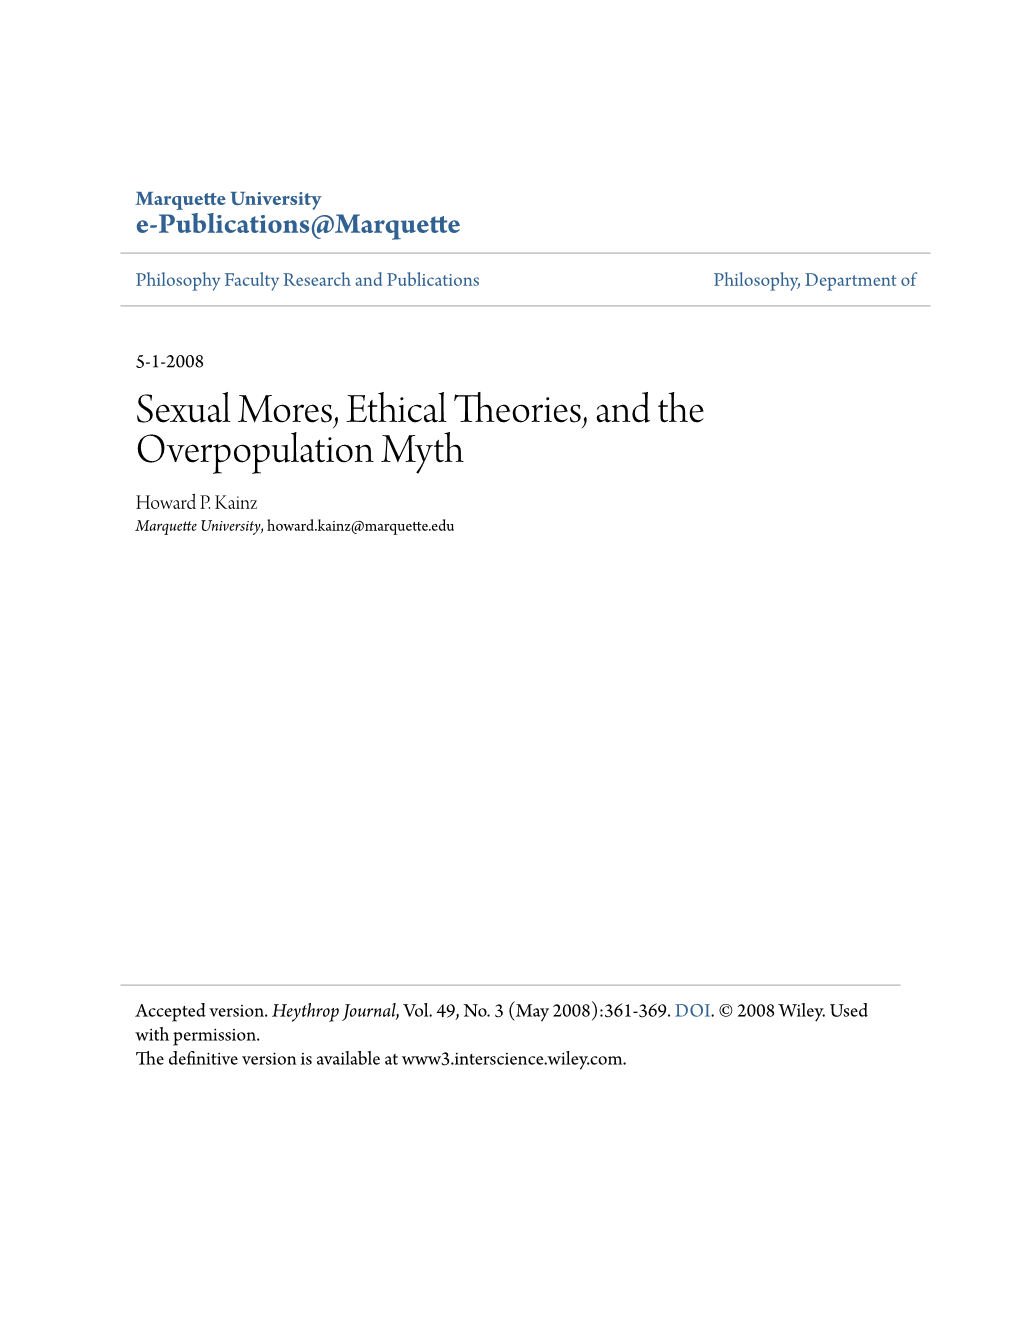 Sexual Mores, Ethical Theories, and the Overpopulation Myth Howard P